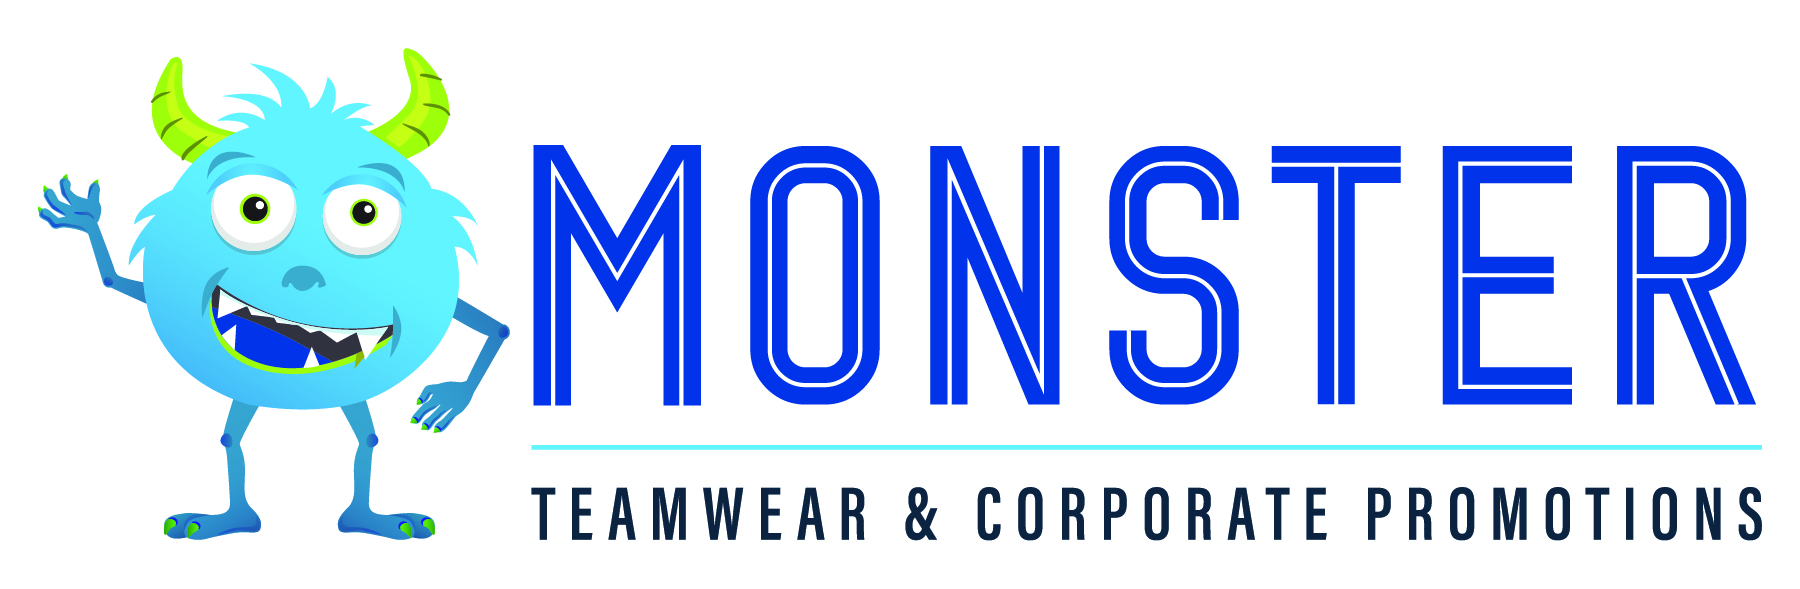 Monster Teamwear & Corporate Promotions, Whitby, ON 's Logo